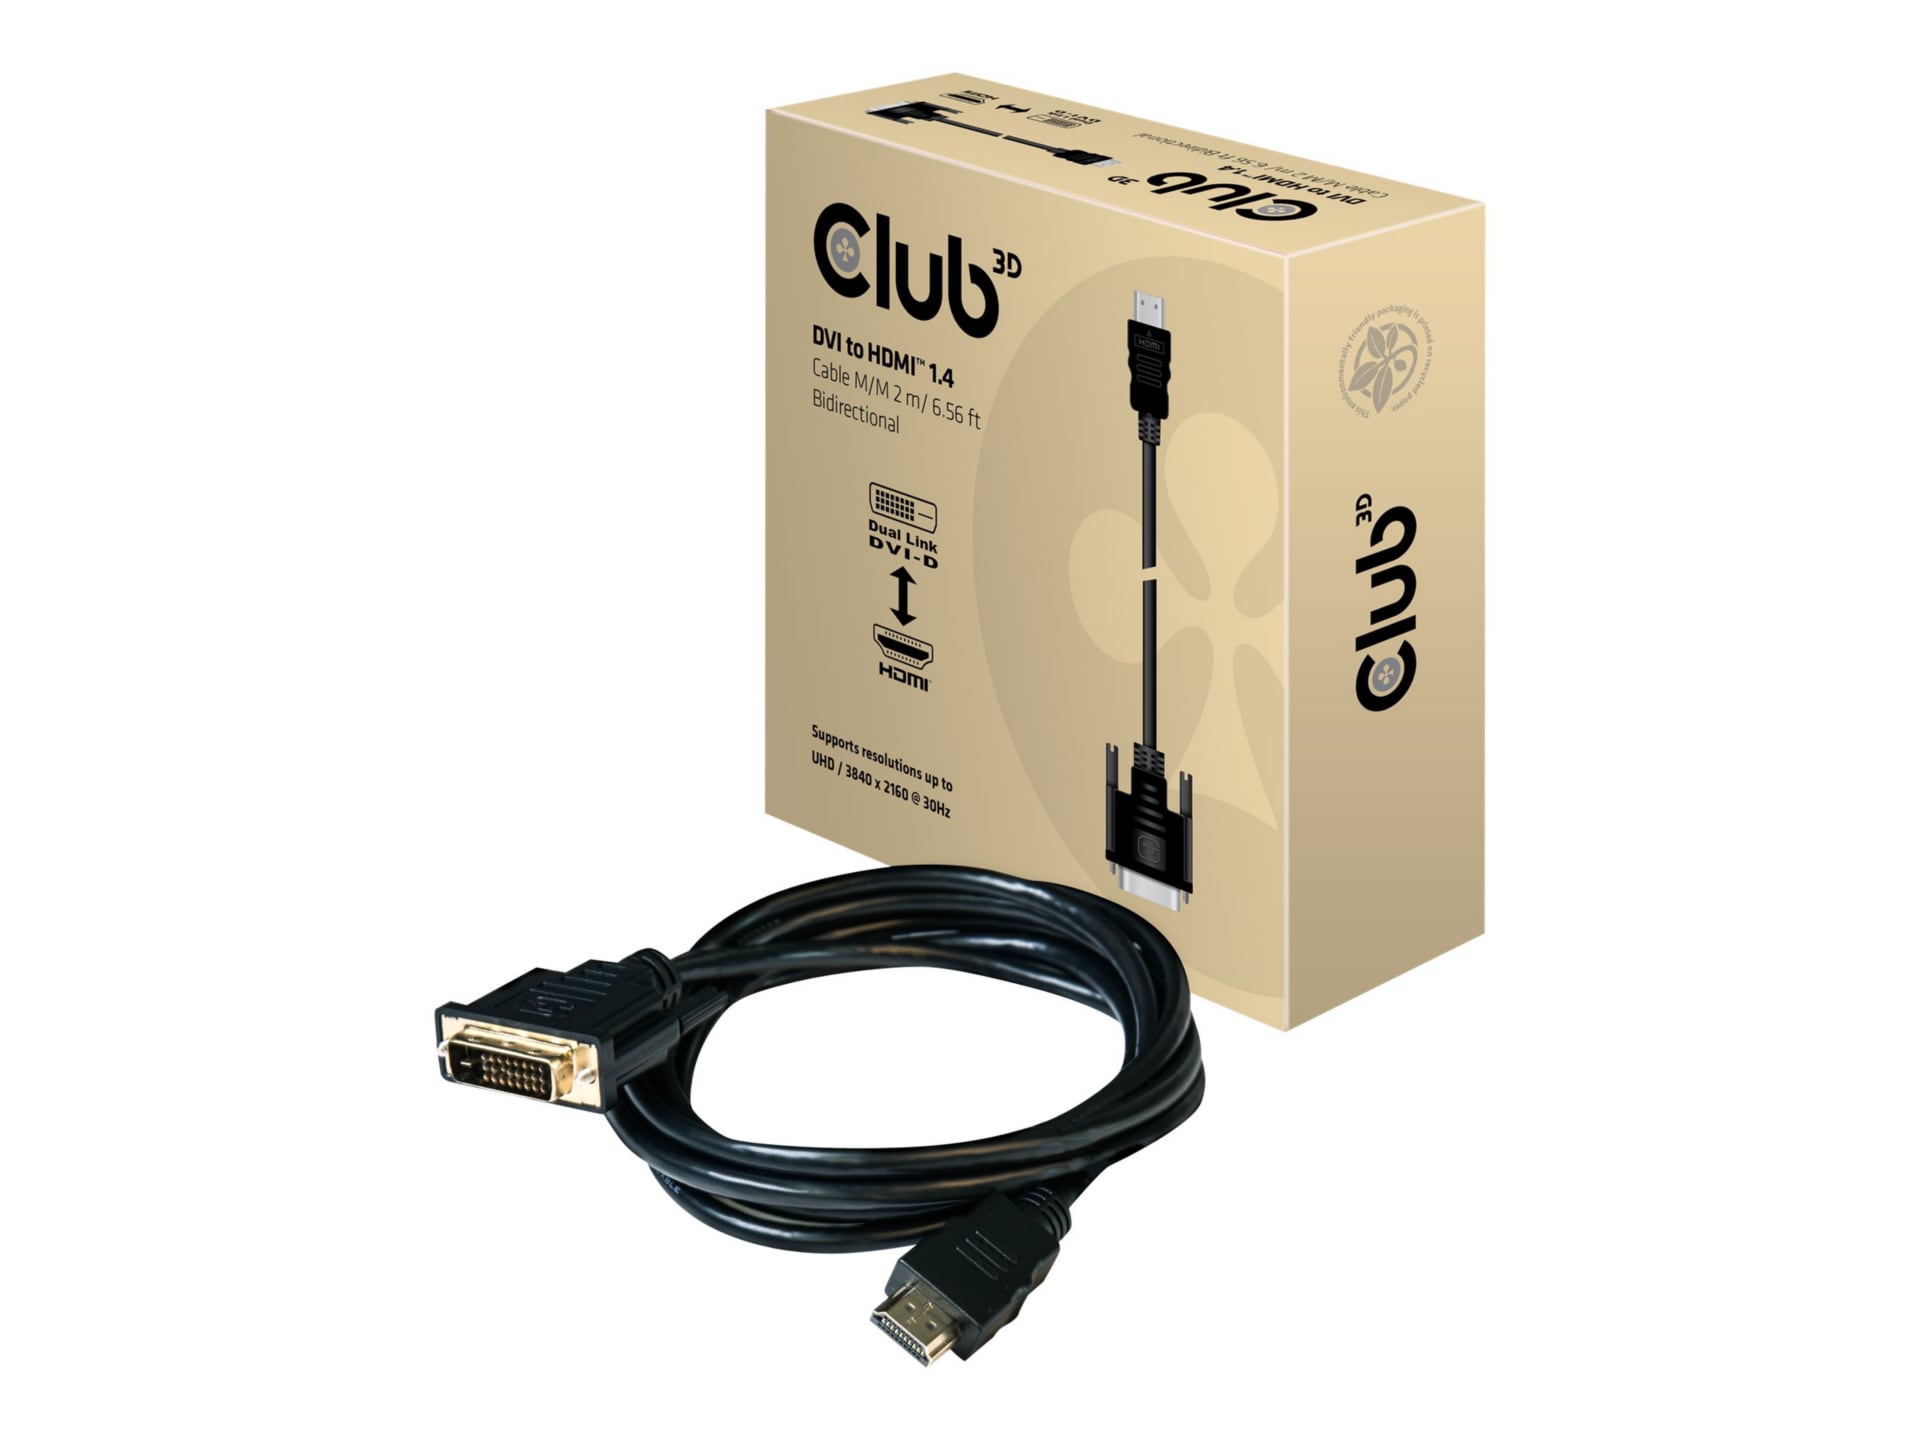 Club 3D CAC-1210 - adapter cable - HDMI / DVI - 2 m